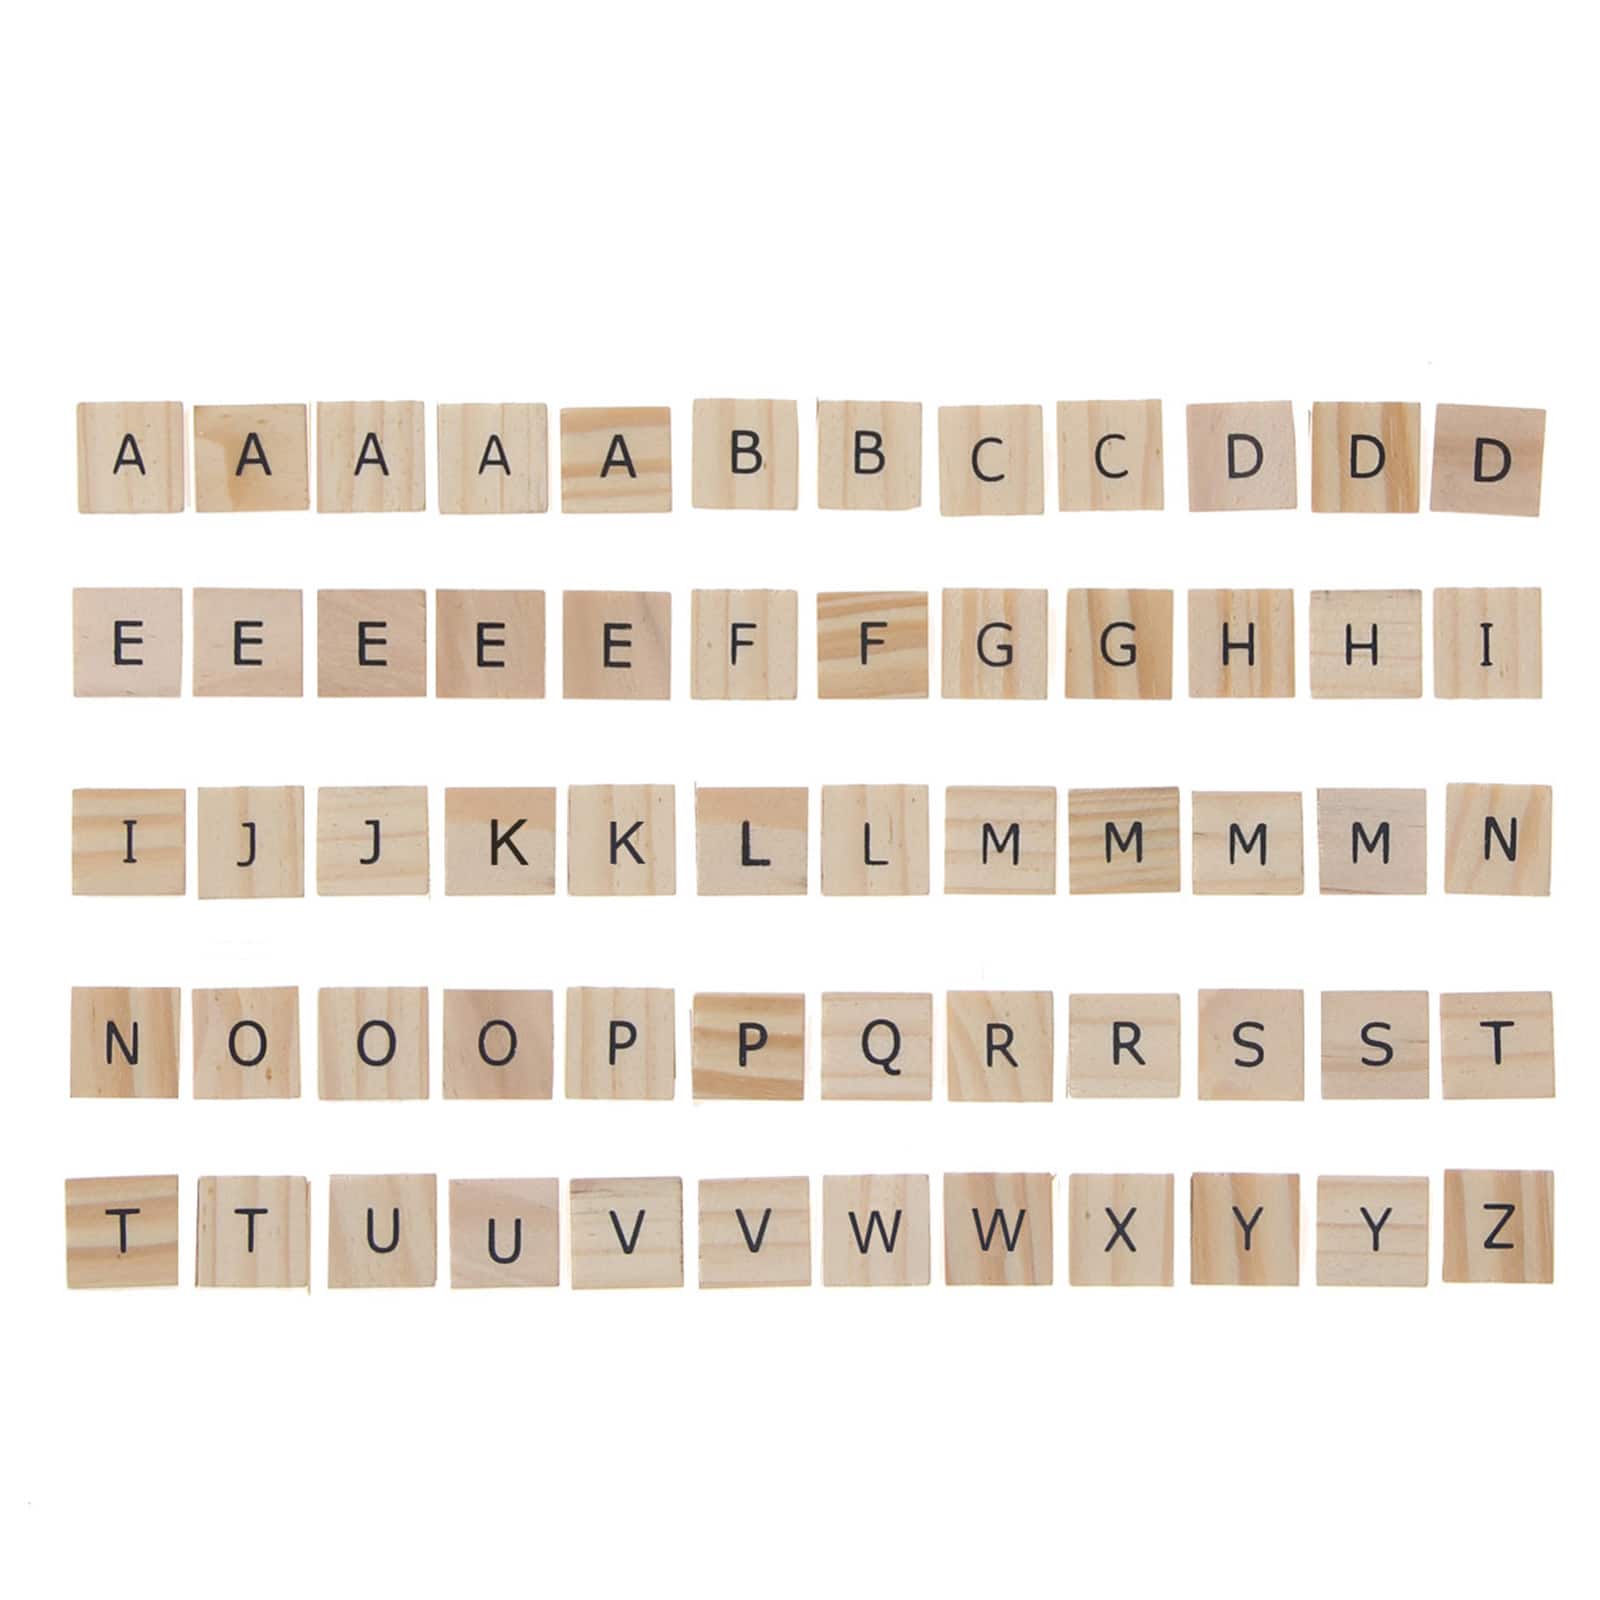 More useful letter selection Red Wooden Alphabetical Letter Game Tiles Set of 100 Tiles for Crafting